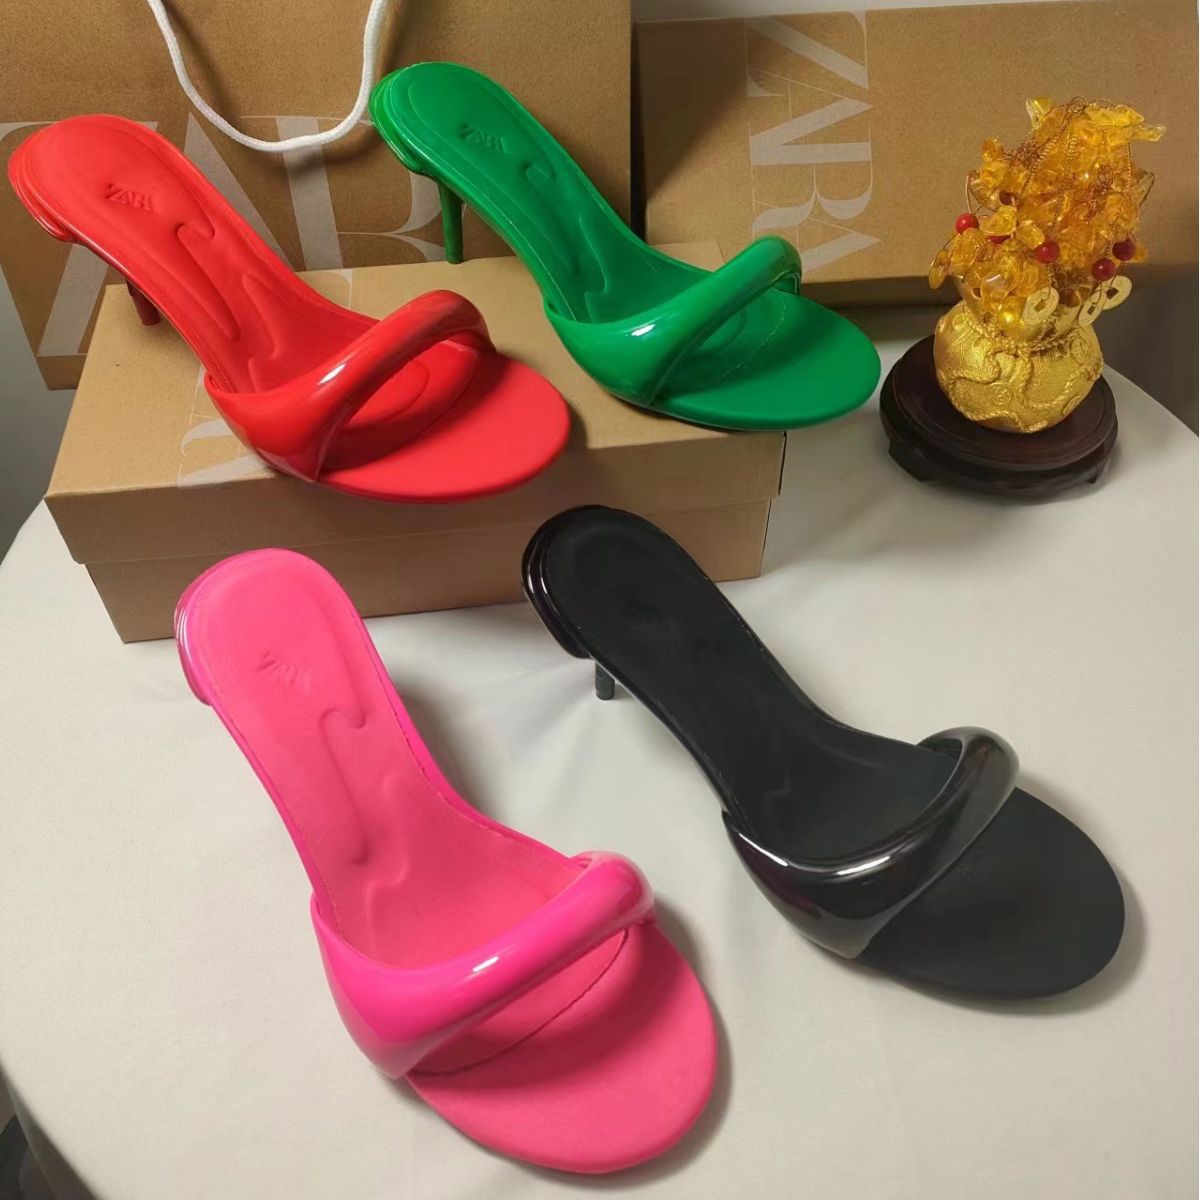 BamBam Women Shoes Wide Candy Color High Heels Slippers Sandals - BamBam